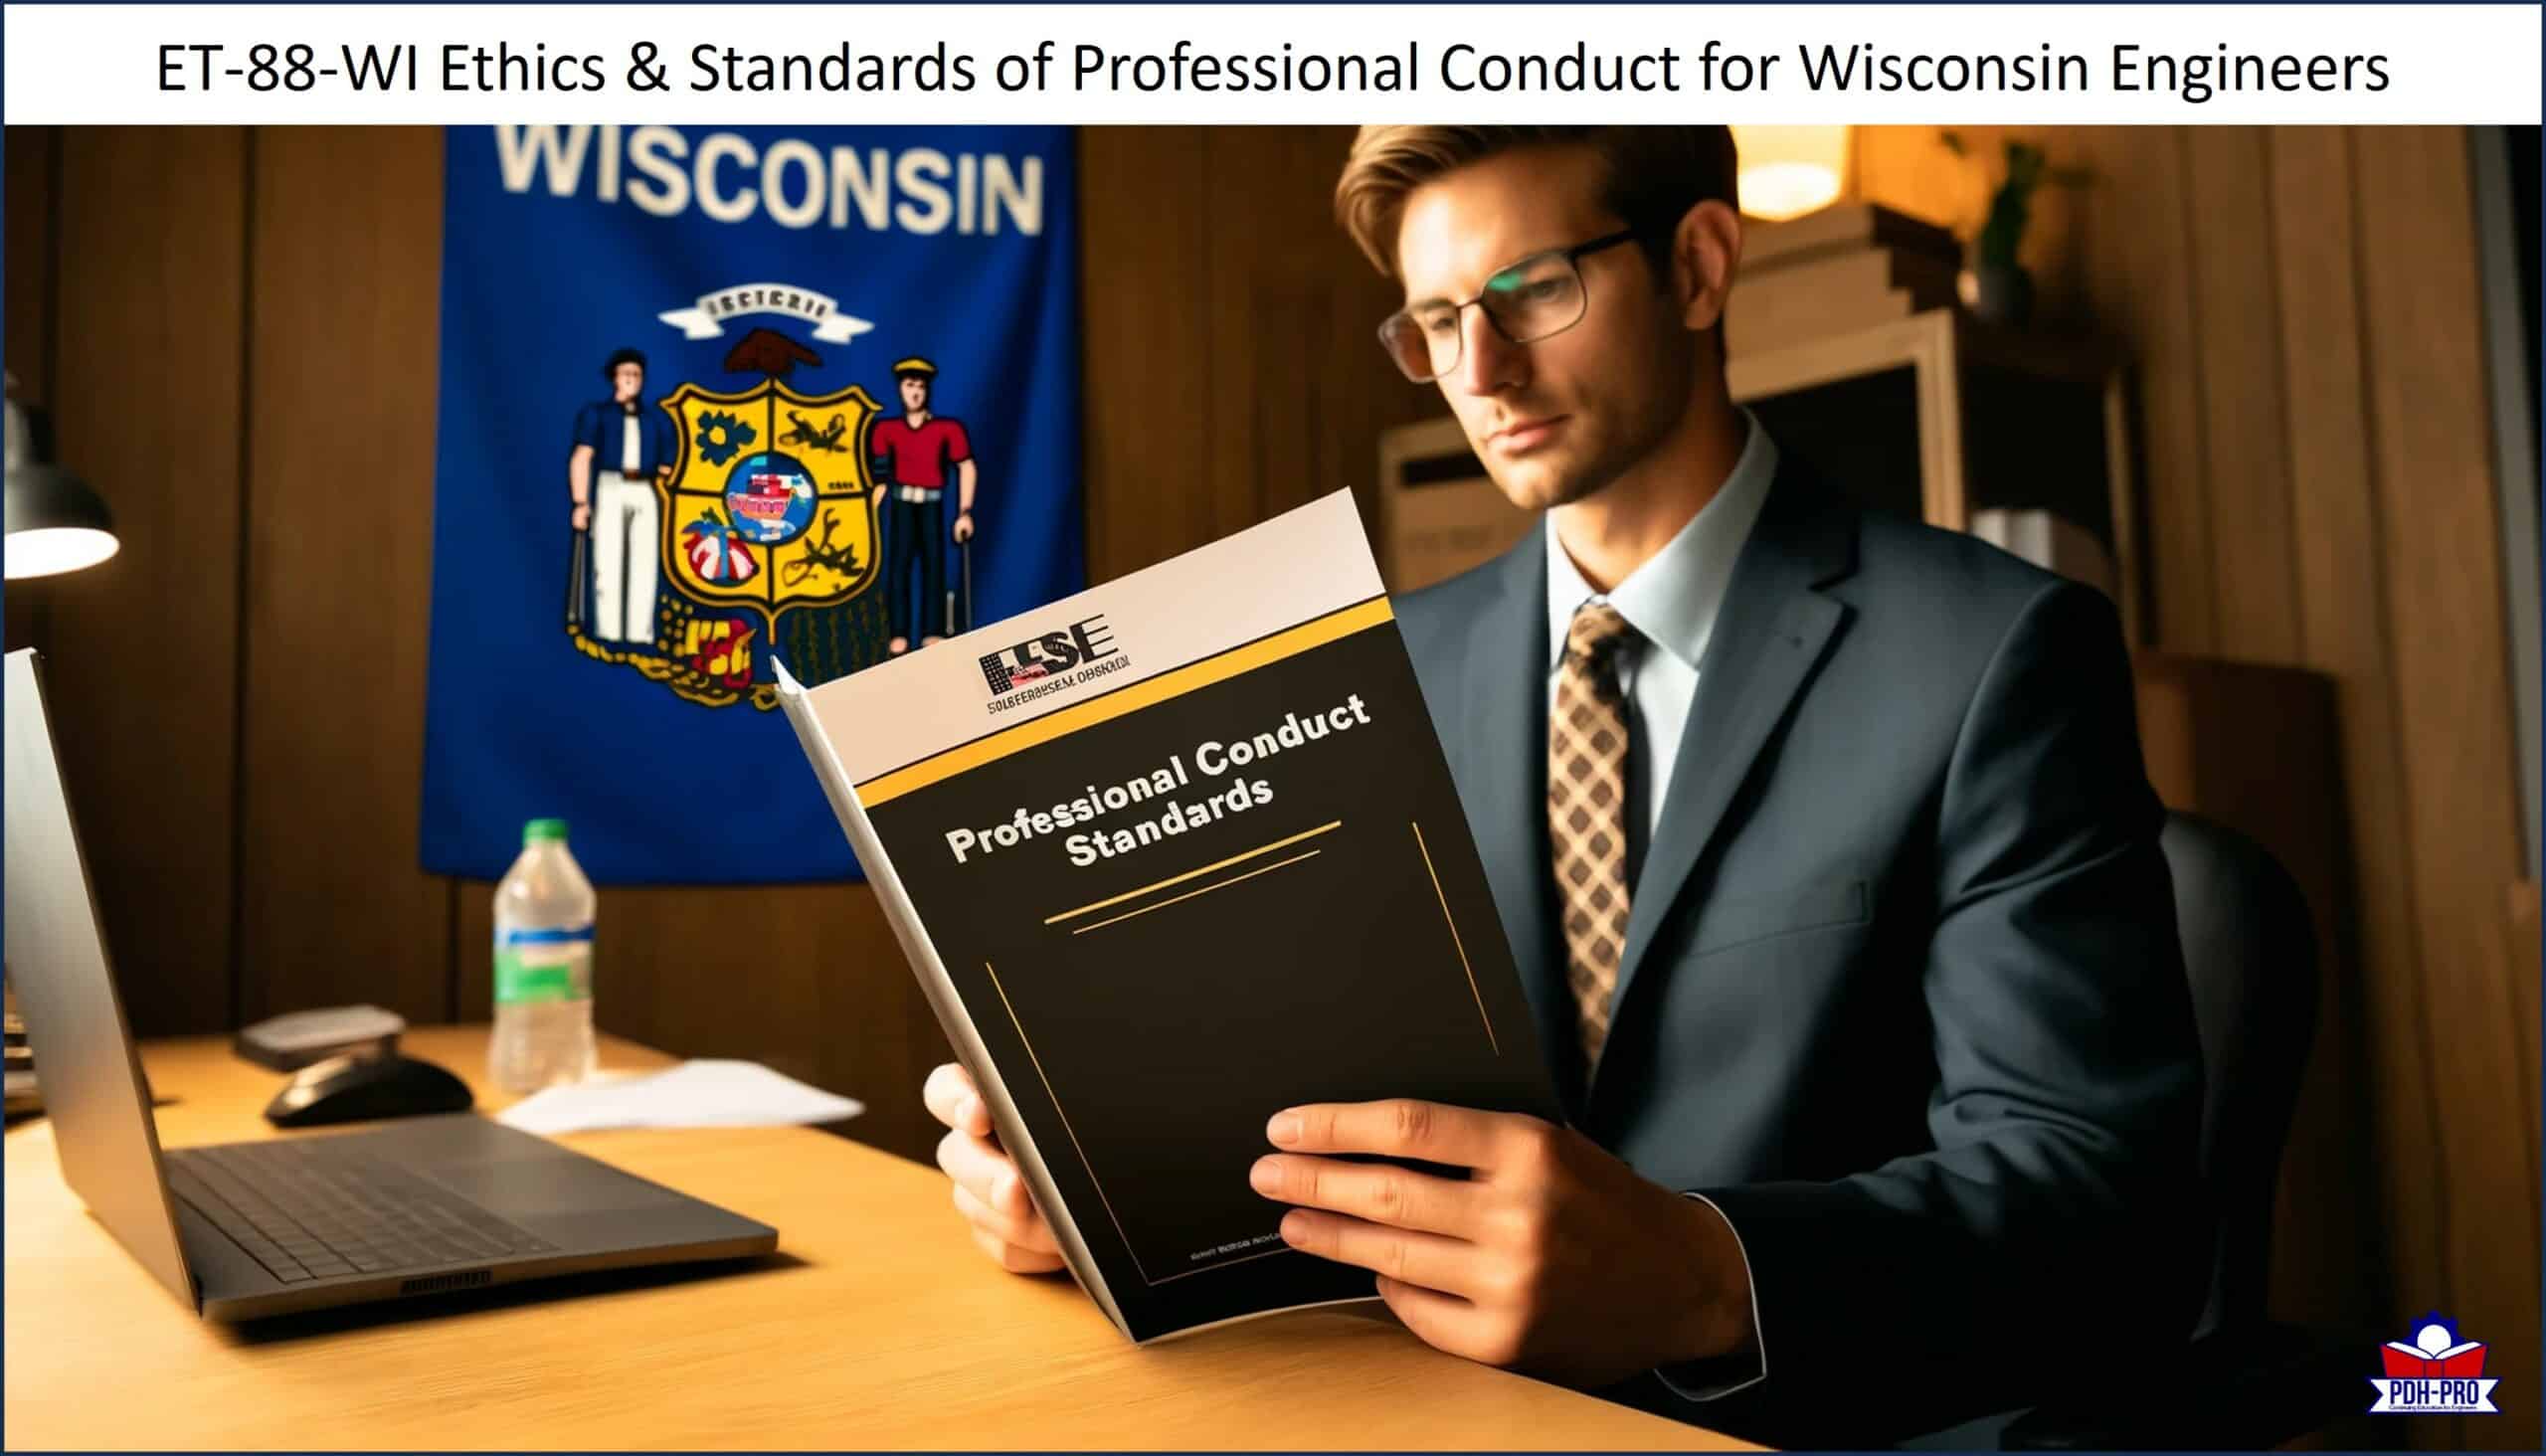 Ethics & Standards of Professional Conduct for Wisconsin Engineers